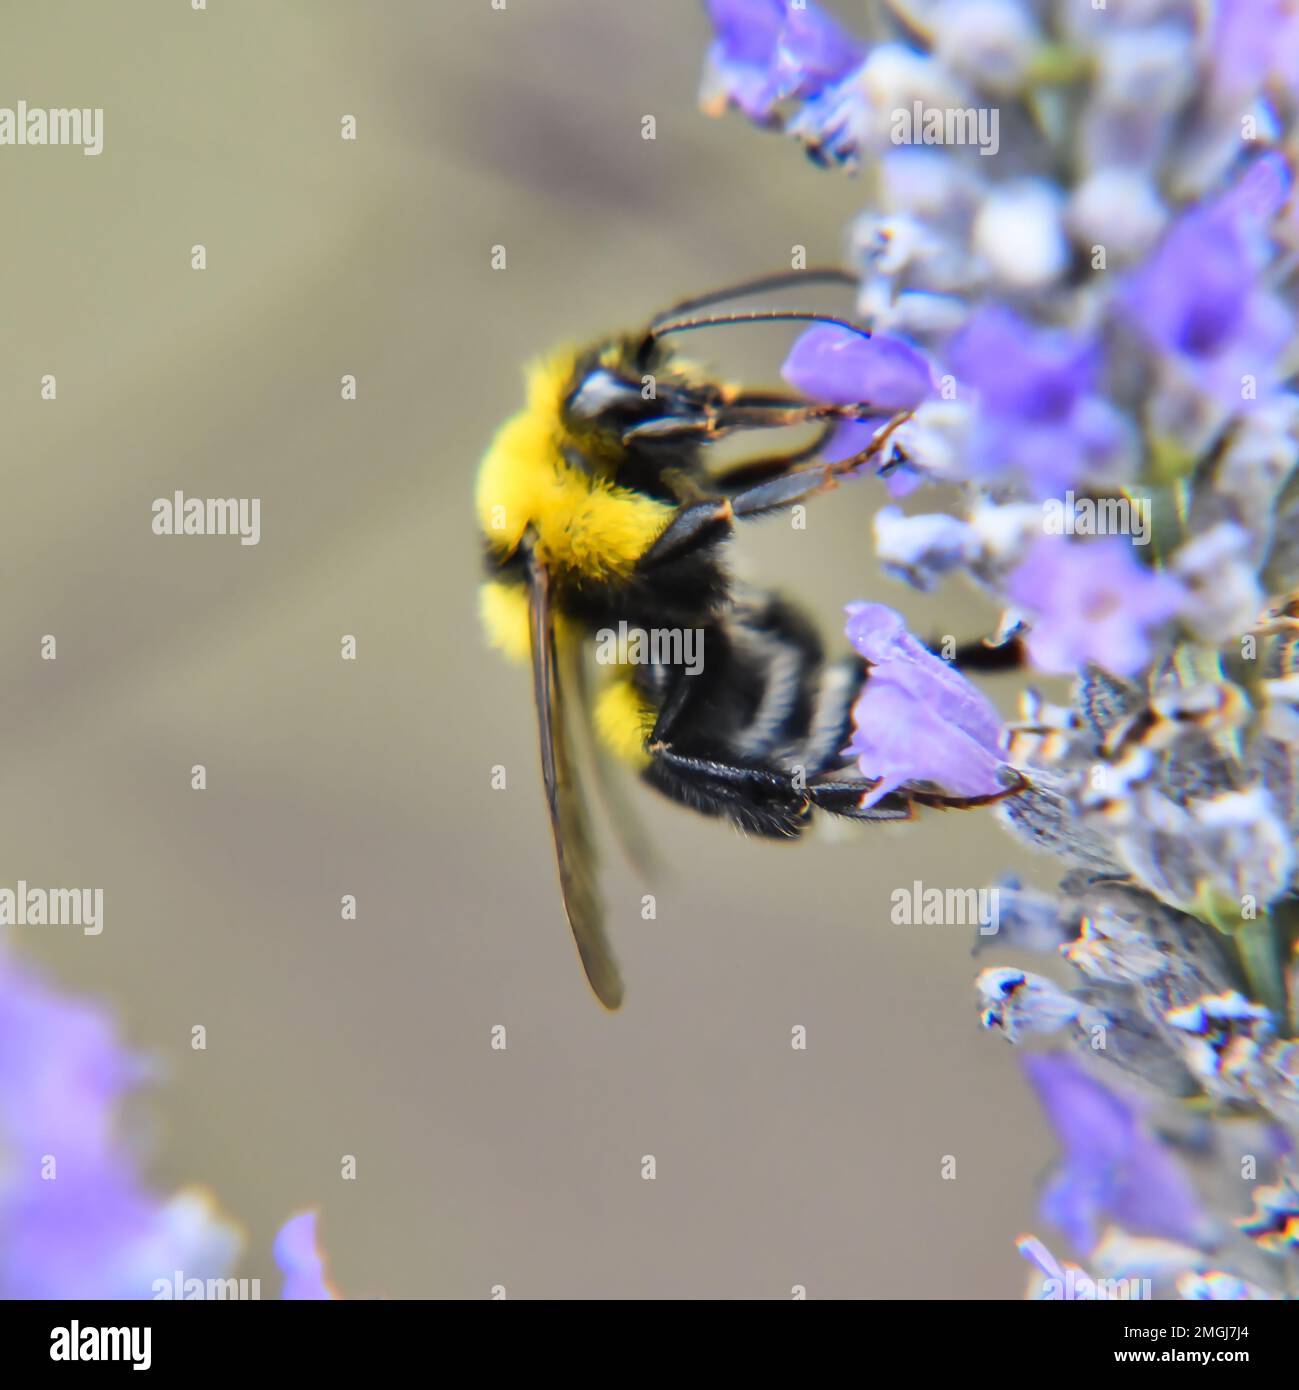 A closeup of bee sipping nectar from purple flower Stock Photo